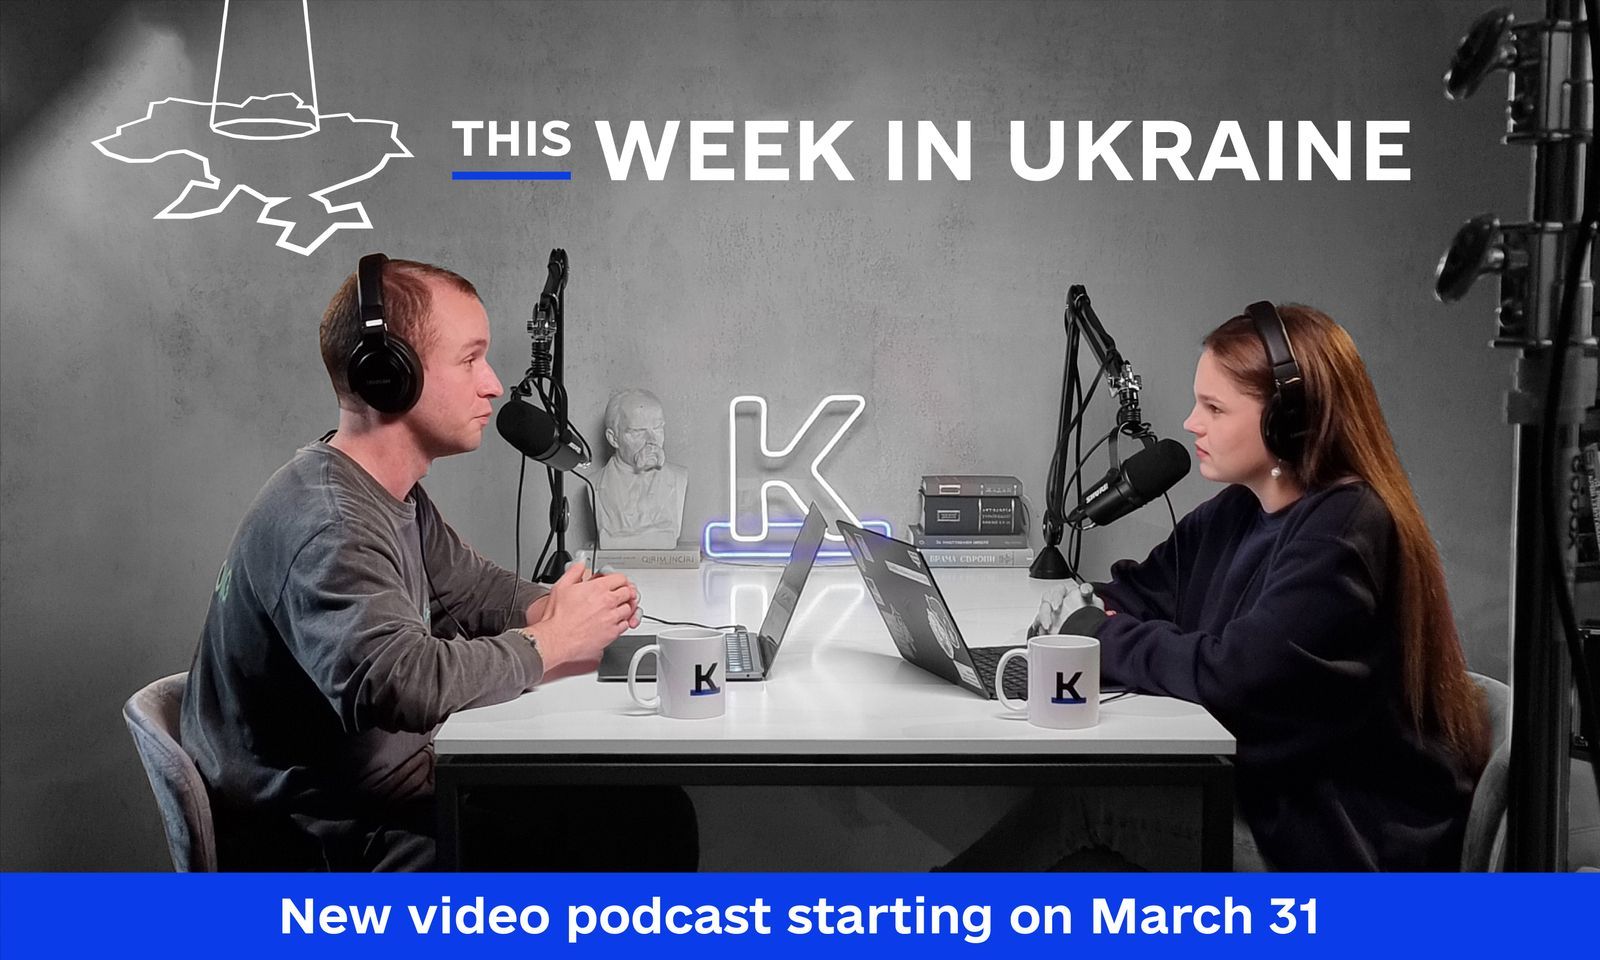 The Kyiv Independent launches new video podcast